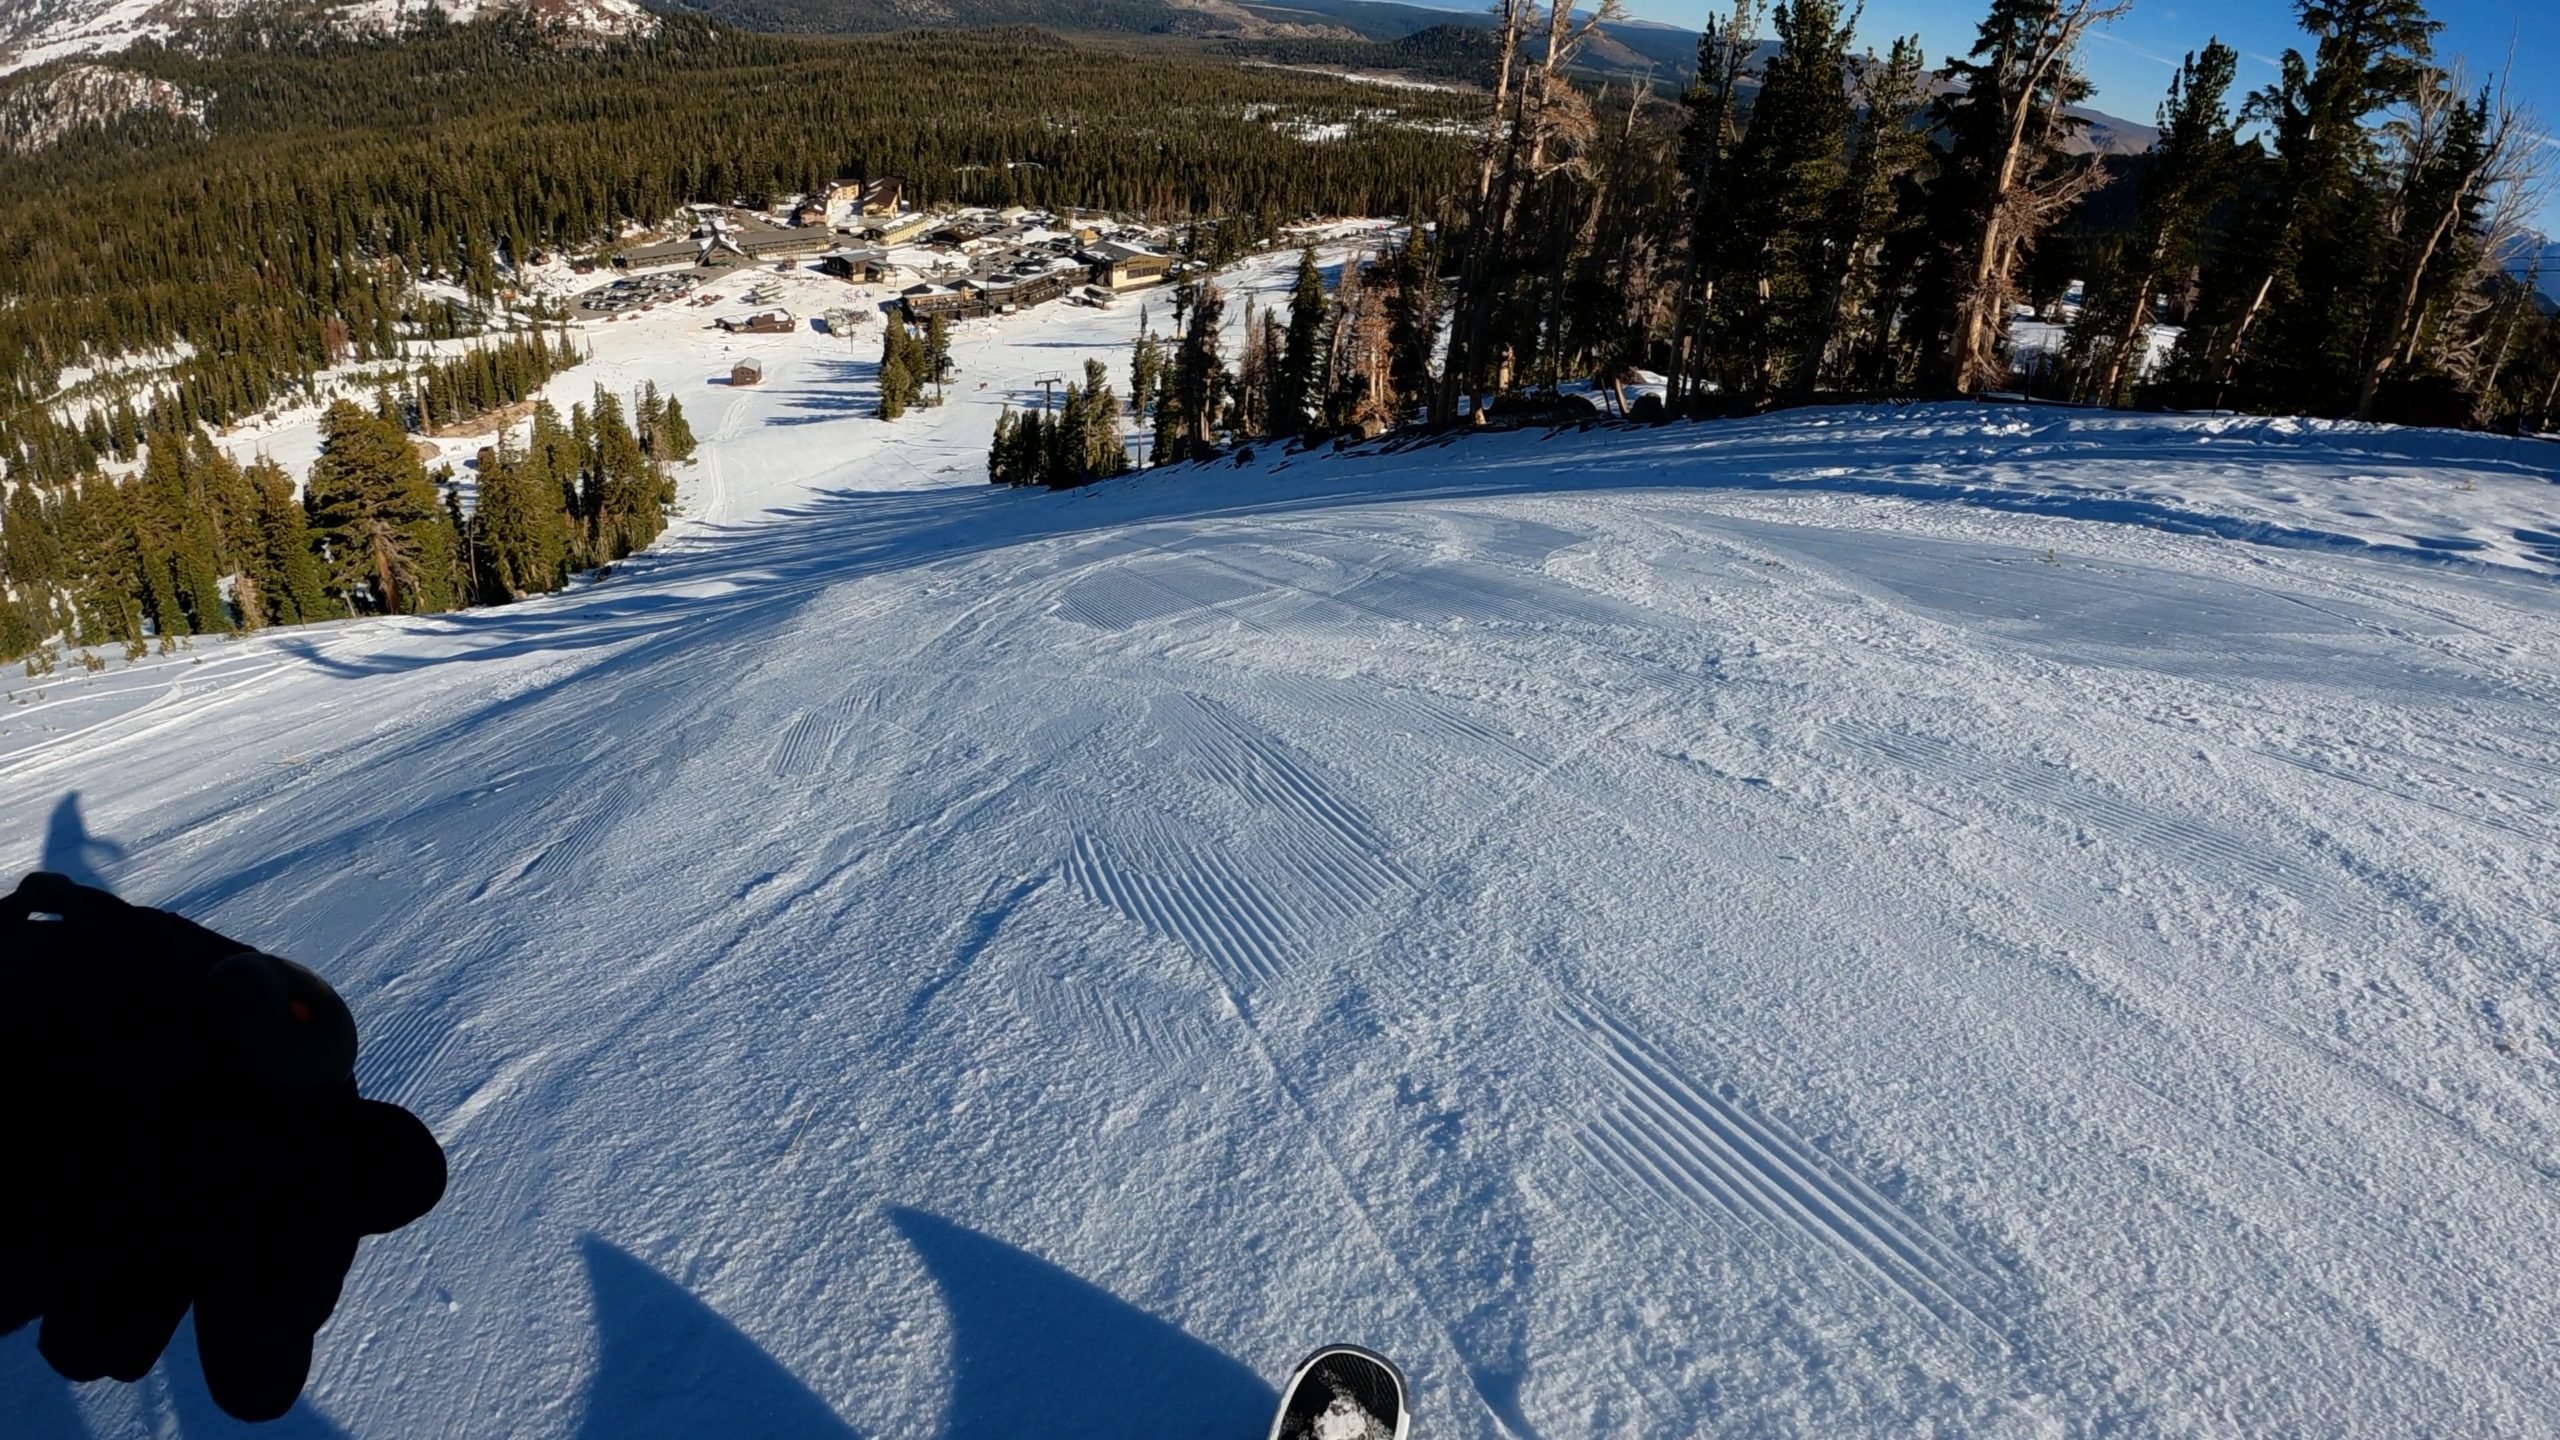 Nothing like some fast carving turns on Fascination